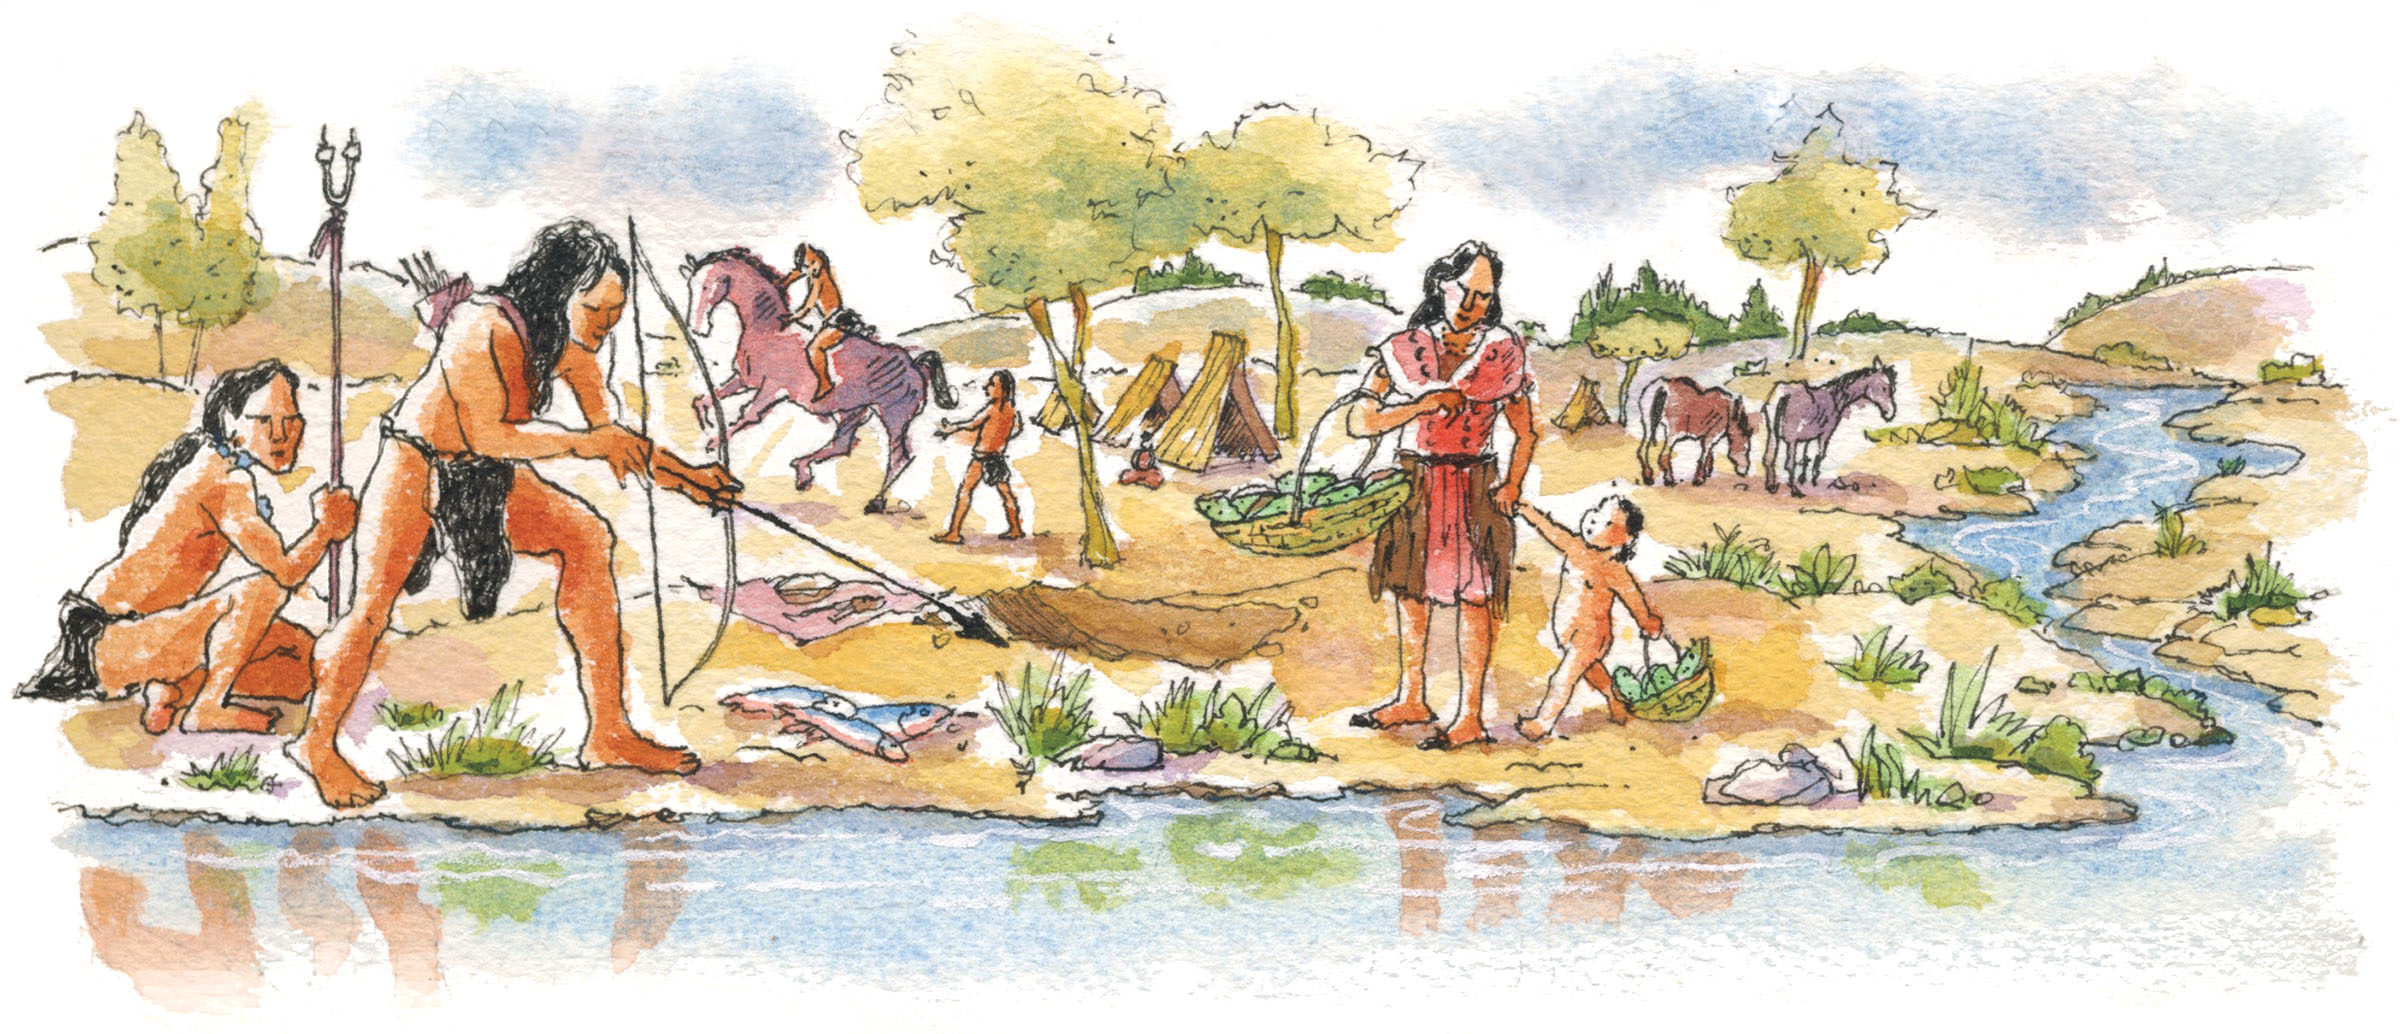 An illustration showing Native Americans fishing and gathering food near the banks of a river